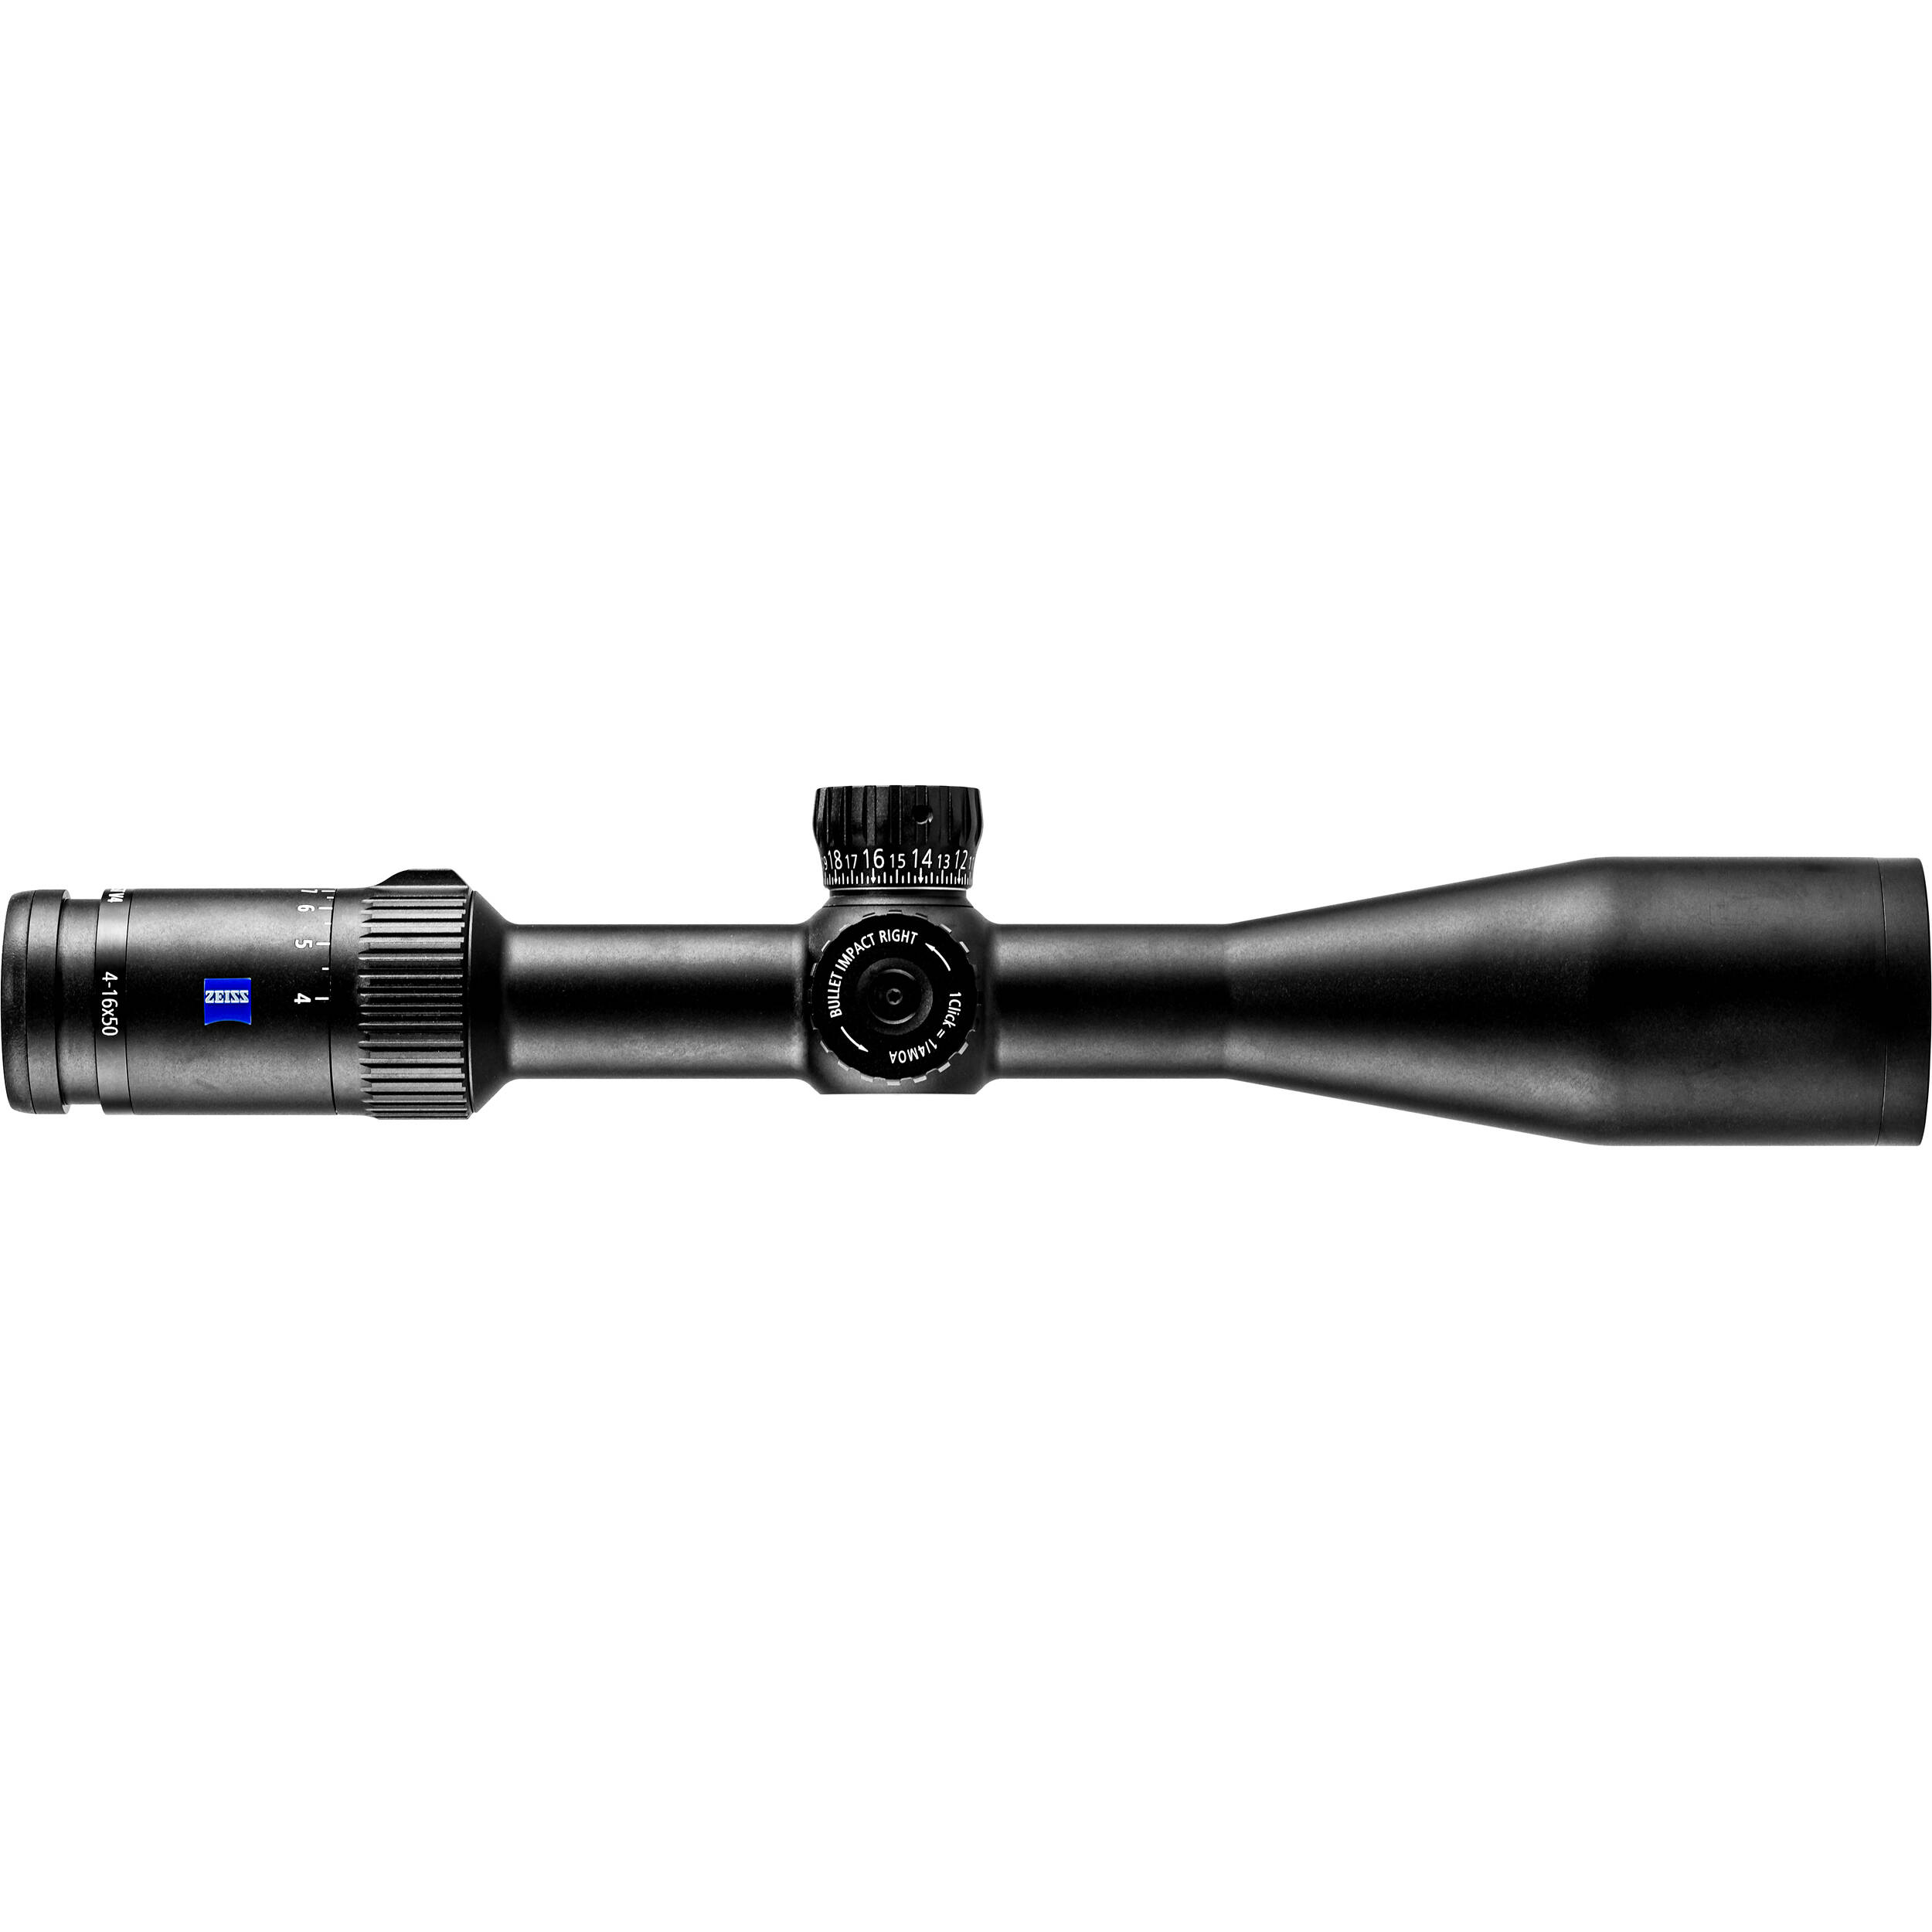 Zeiss Conquest V4 4-16X50 W/ #68 ZBi Illuminated Ballistic Reticle